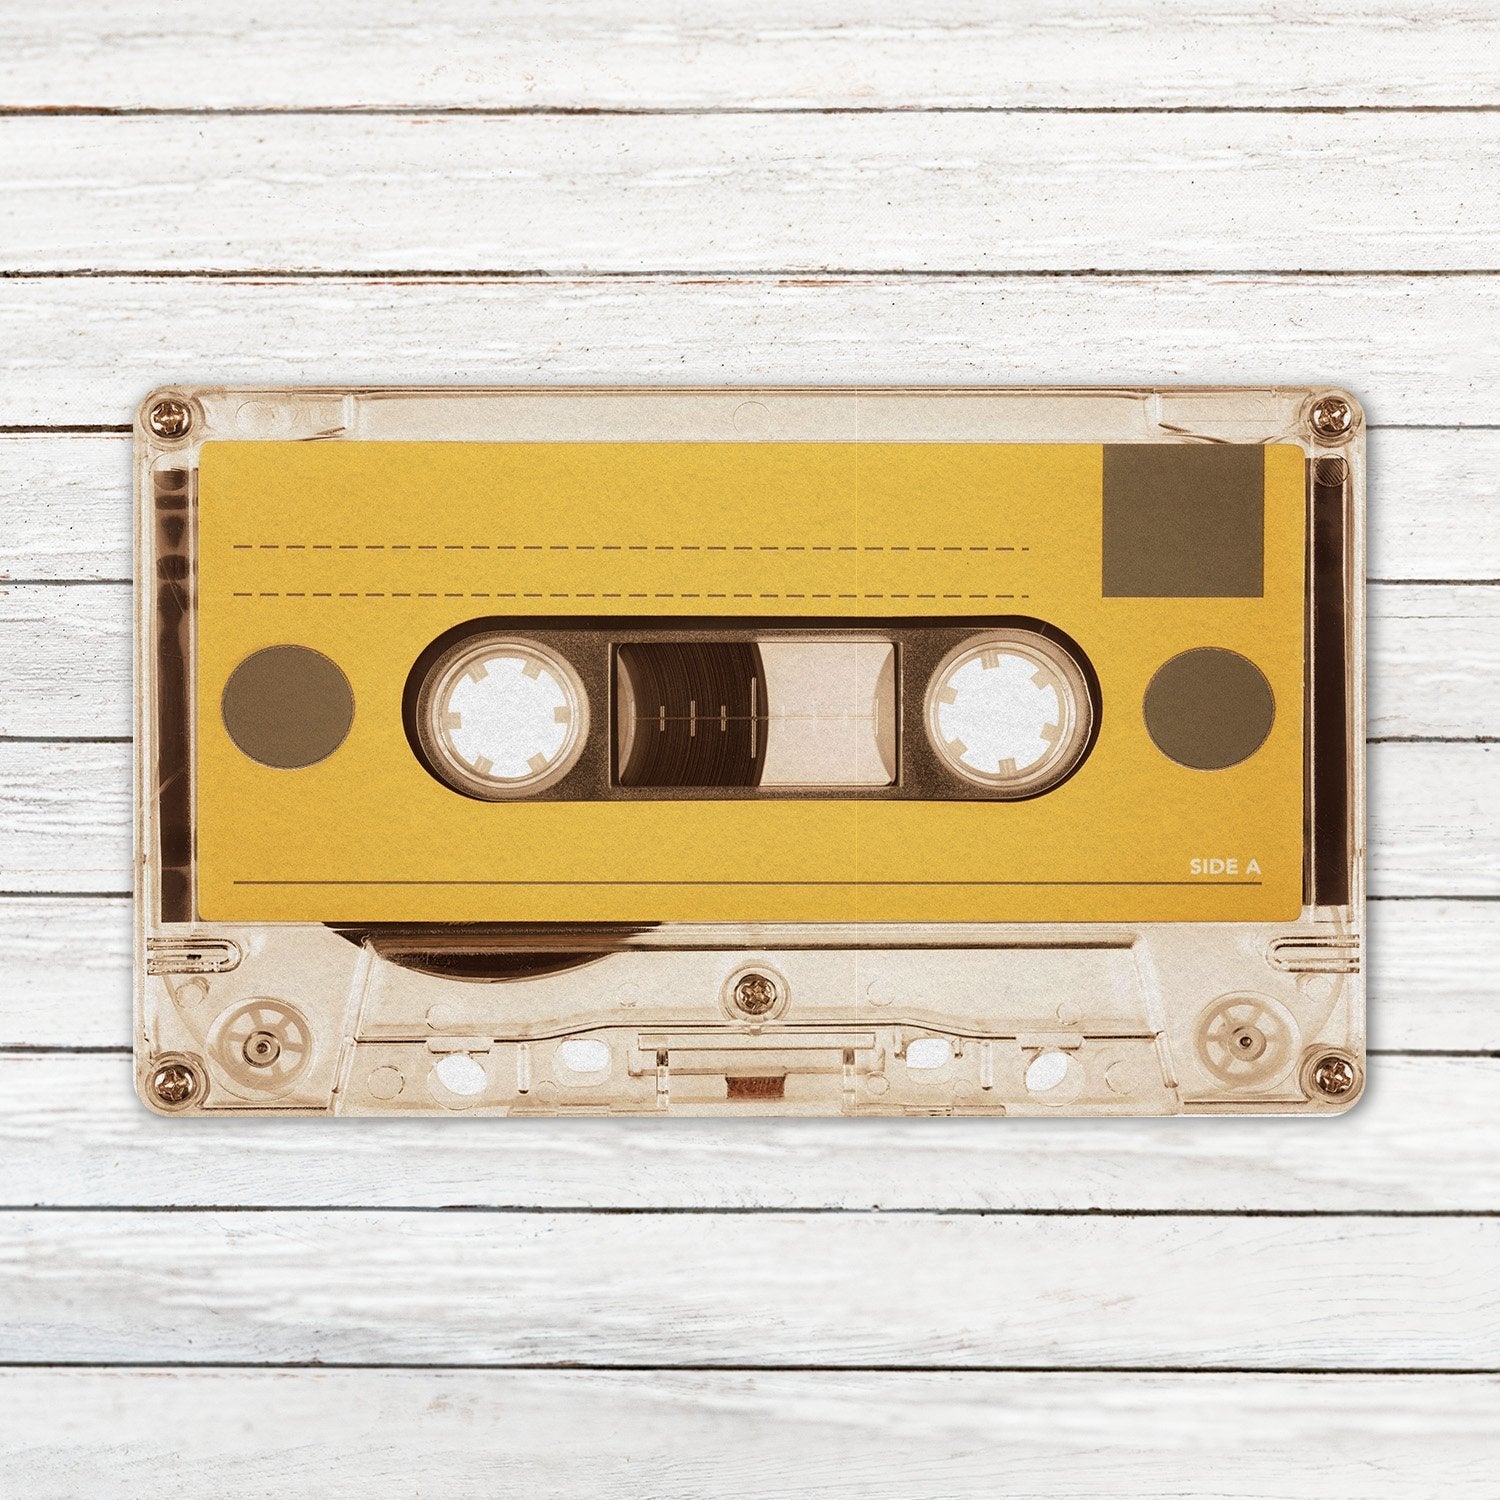 Custom Doormat, Personalized Family Name, Yellow Cassette Player